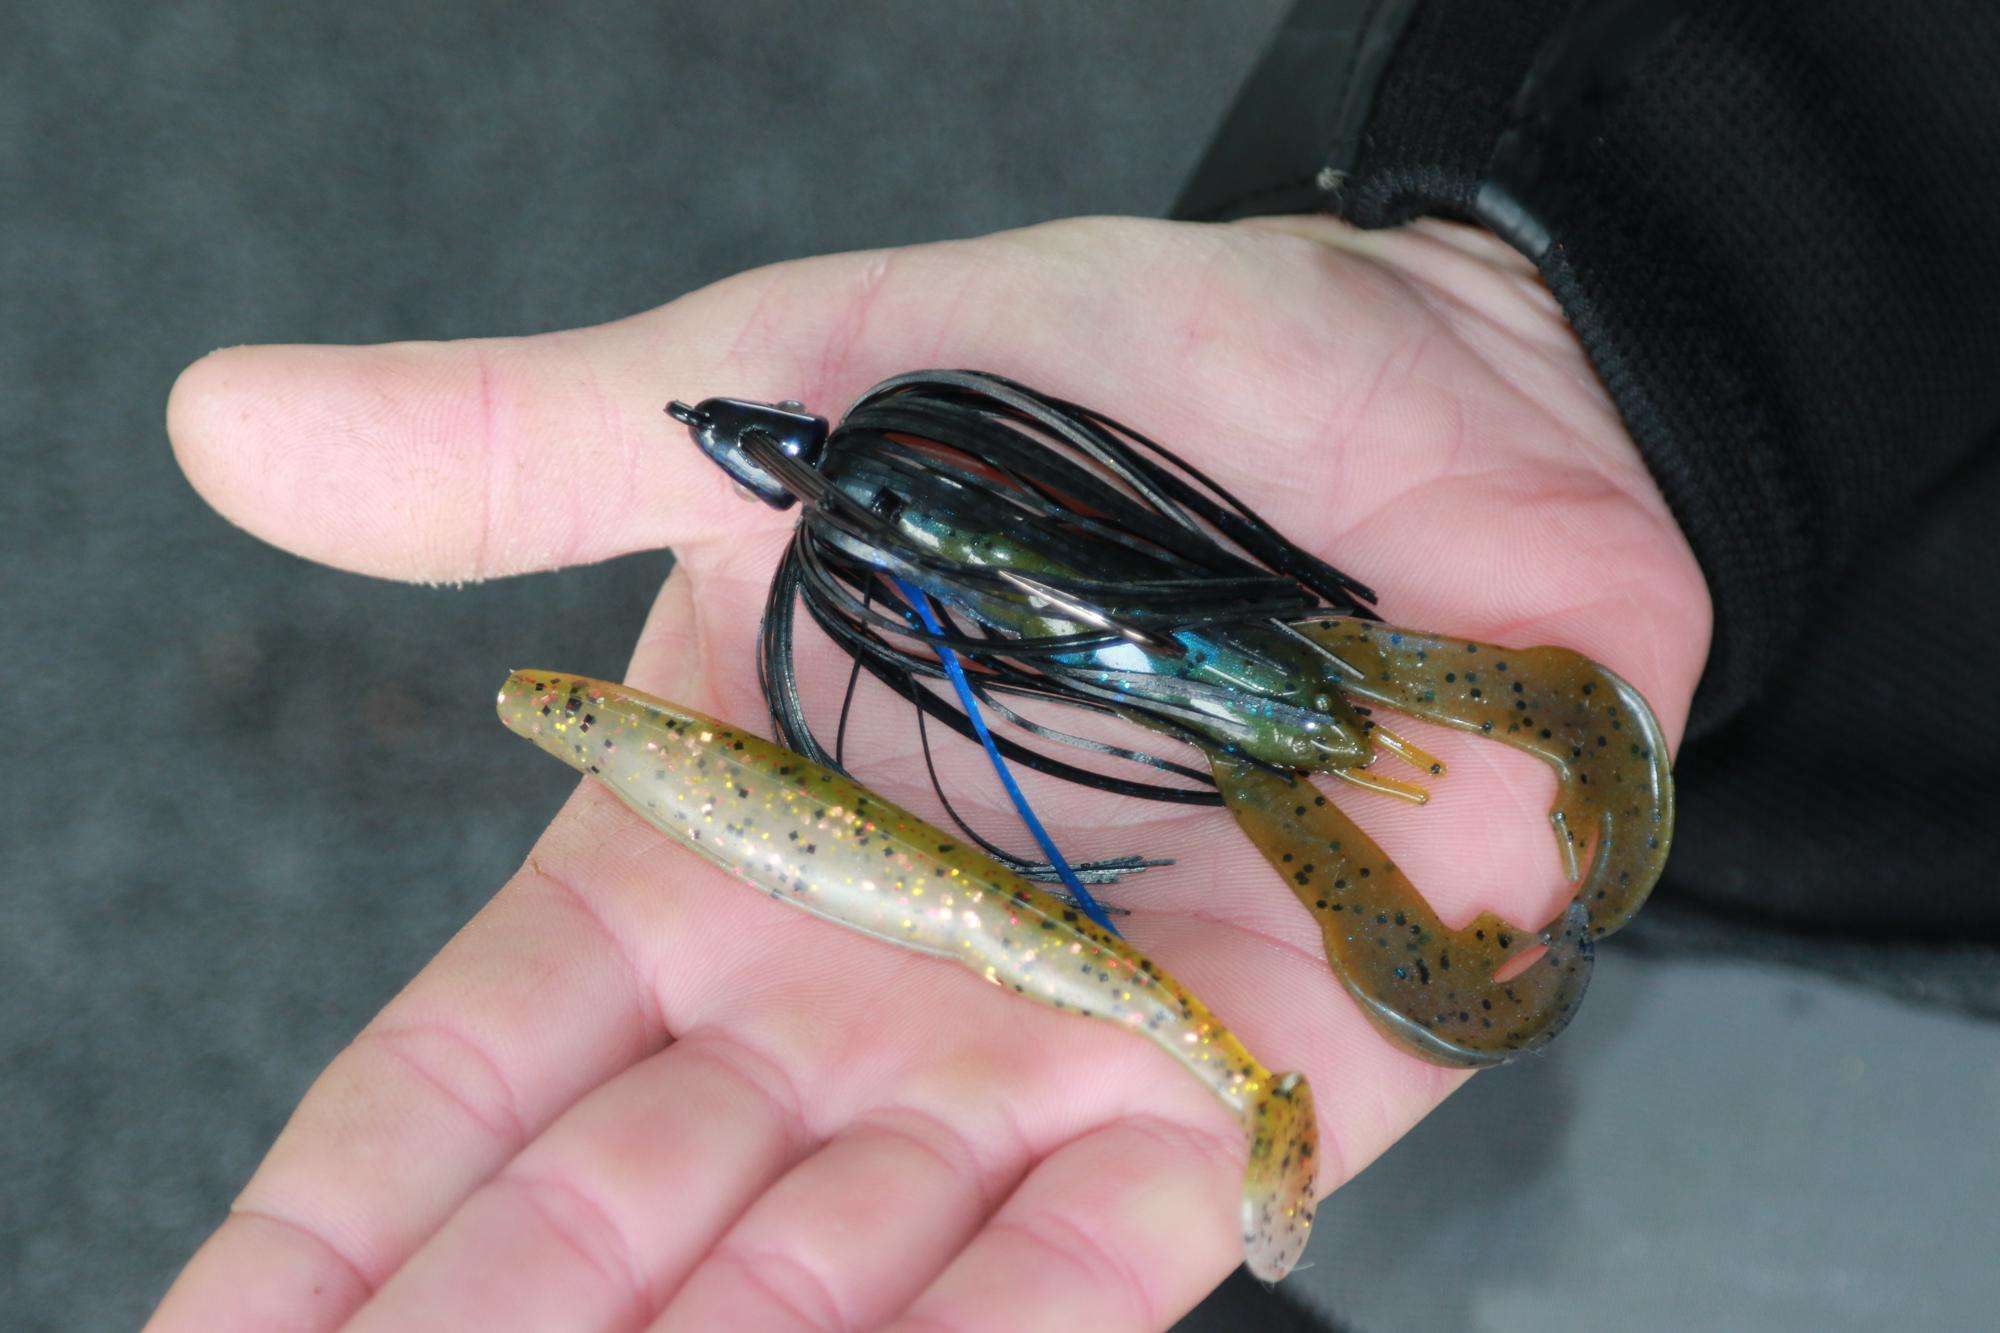 Swim jigs are versatile tools that can navigate just about any type of cover. Combs likes the Strike King Rage Craw for a bold kicking display, while the Strike King Rage Swimmer works best for a traditional baitfish profile.